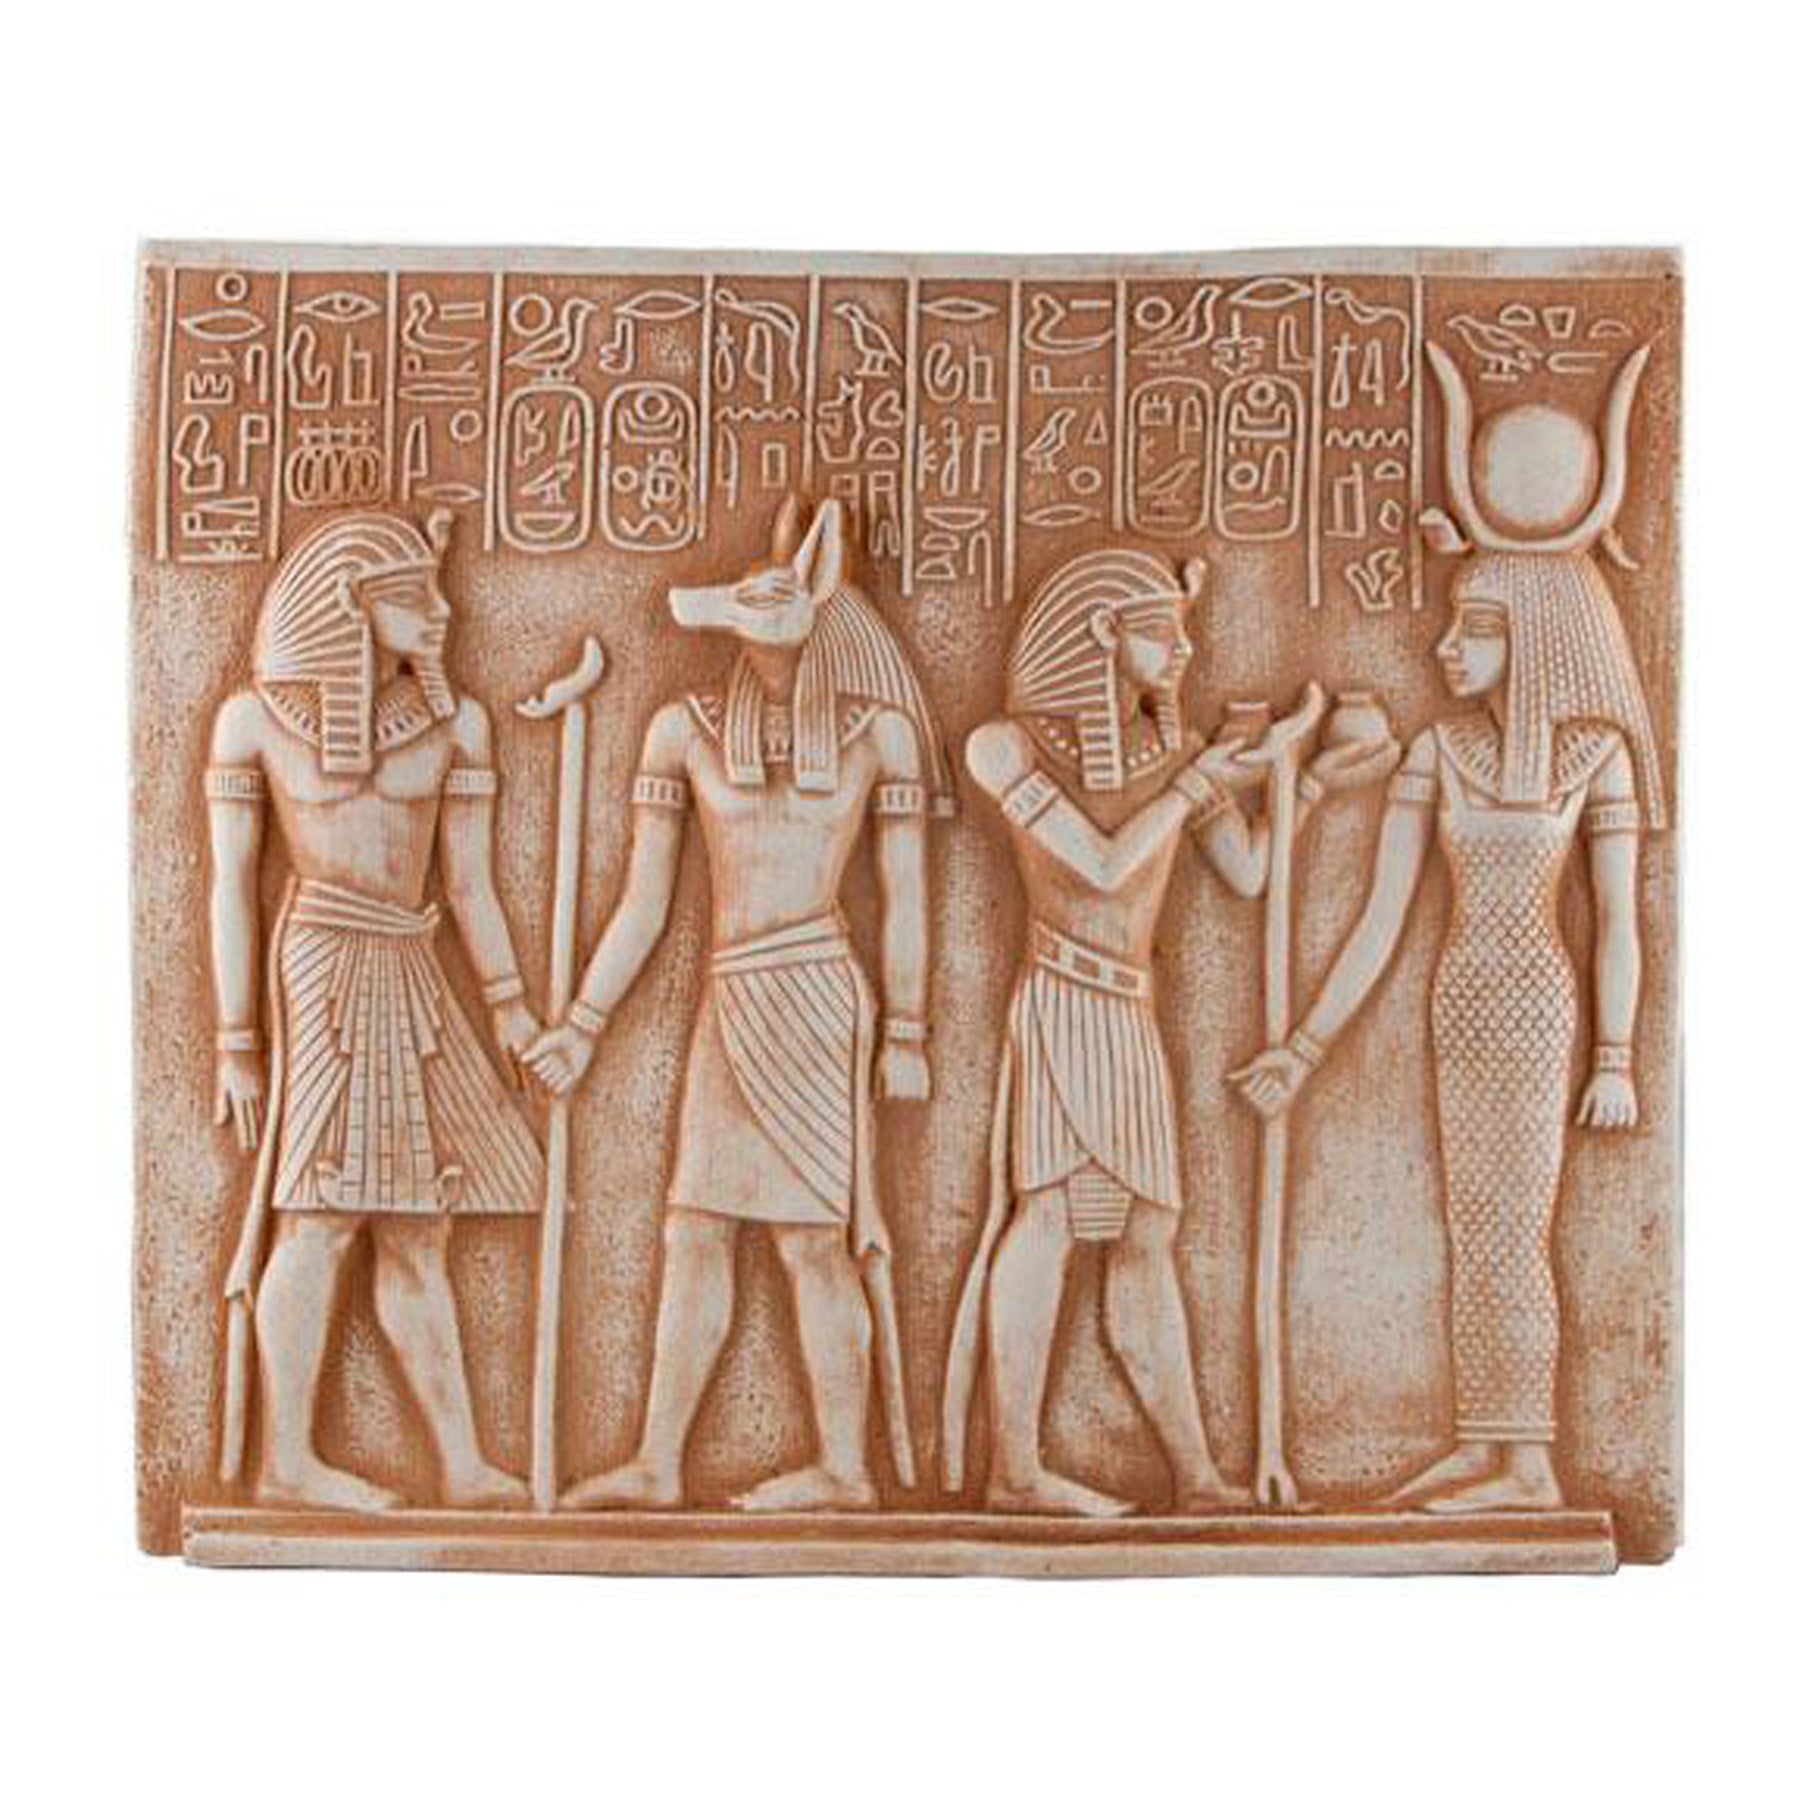 Anubis and Isis Plaque